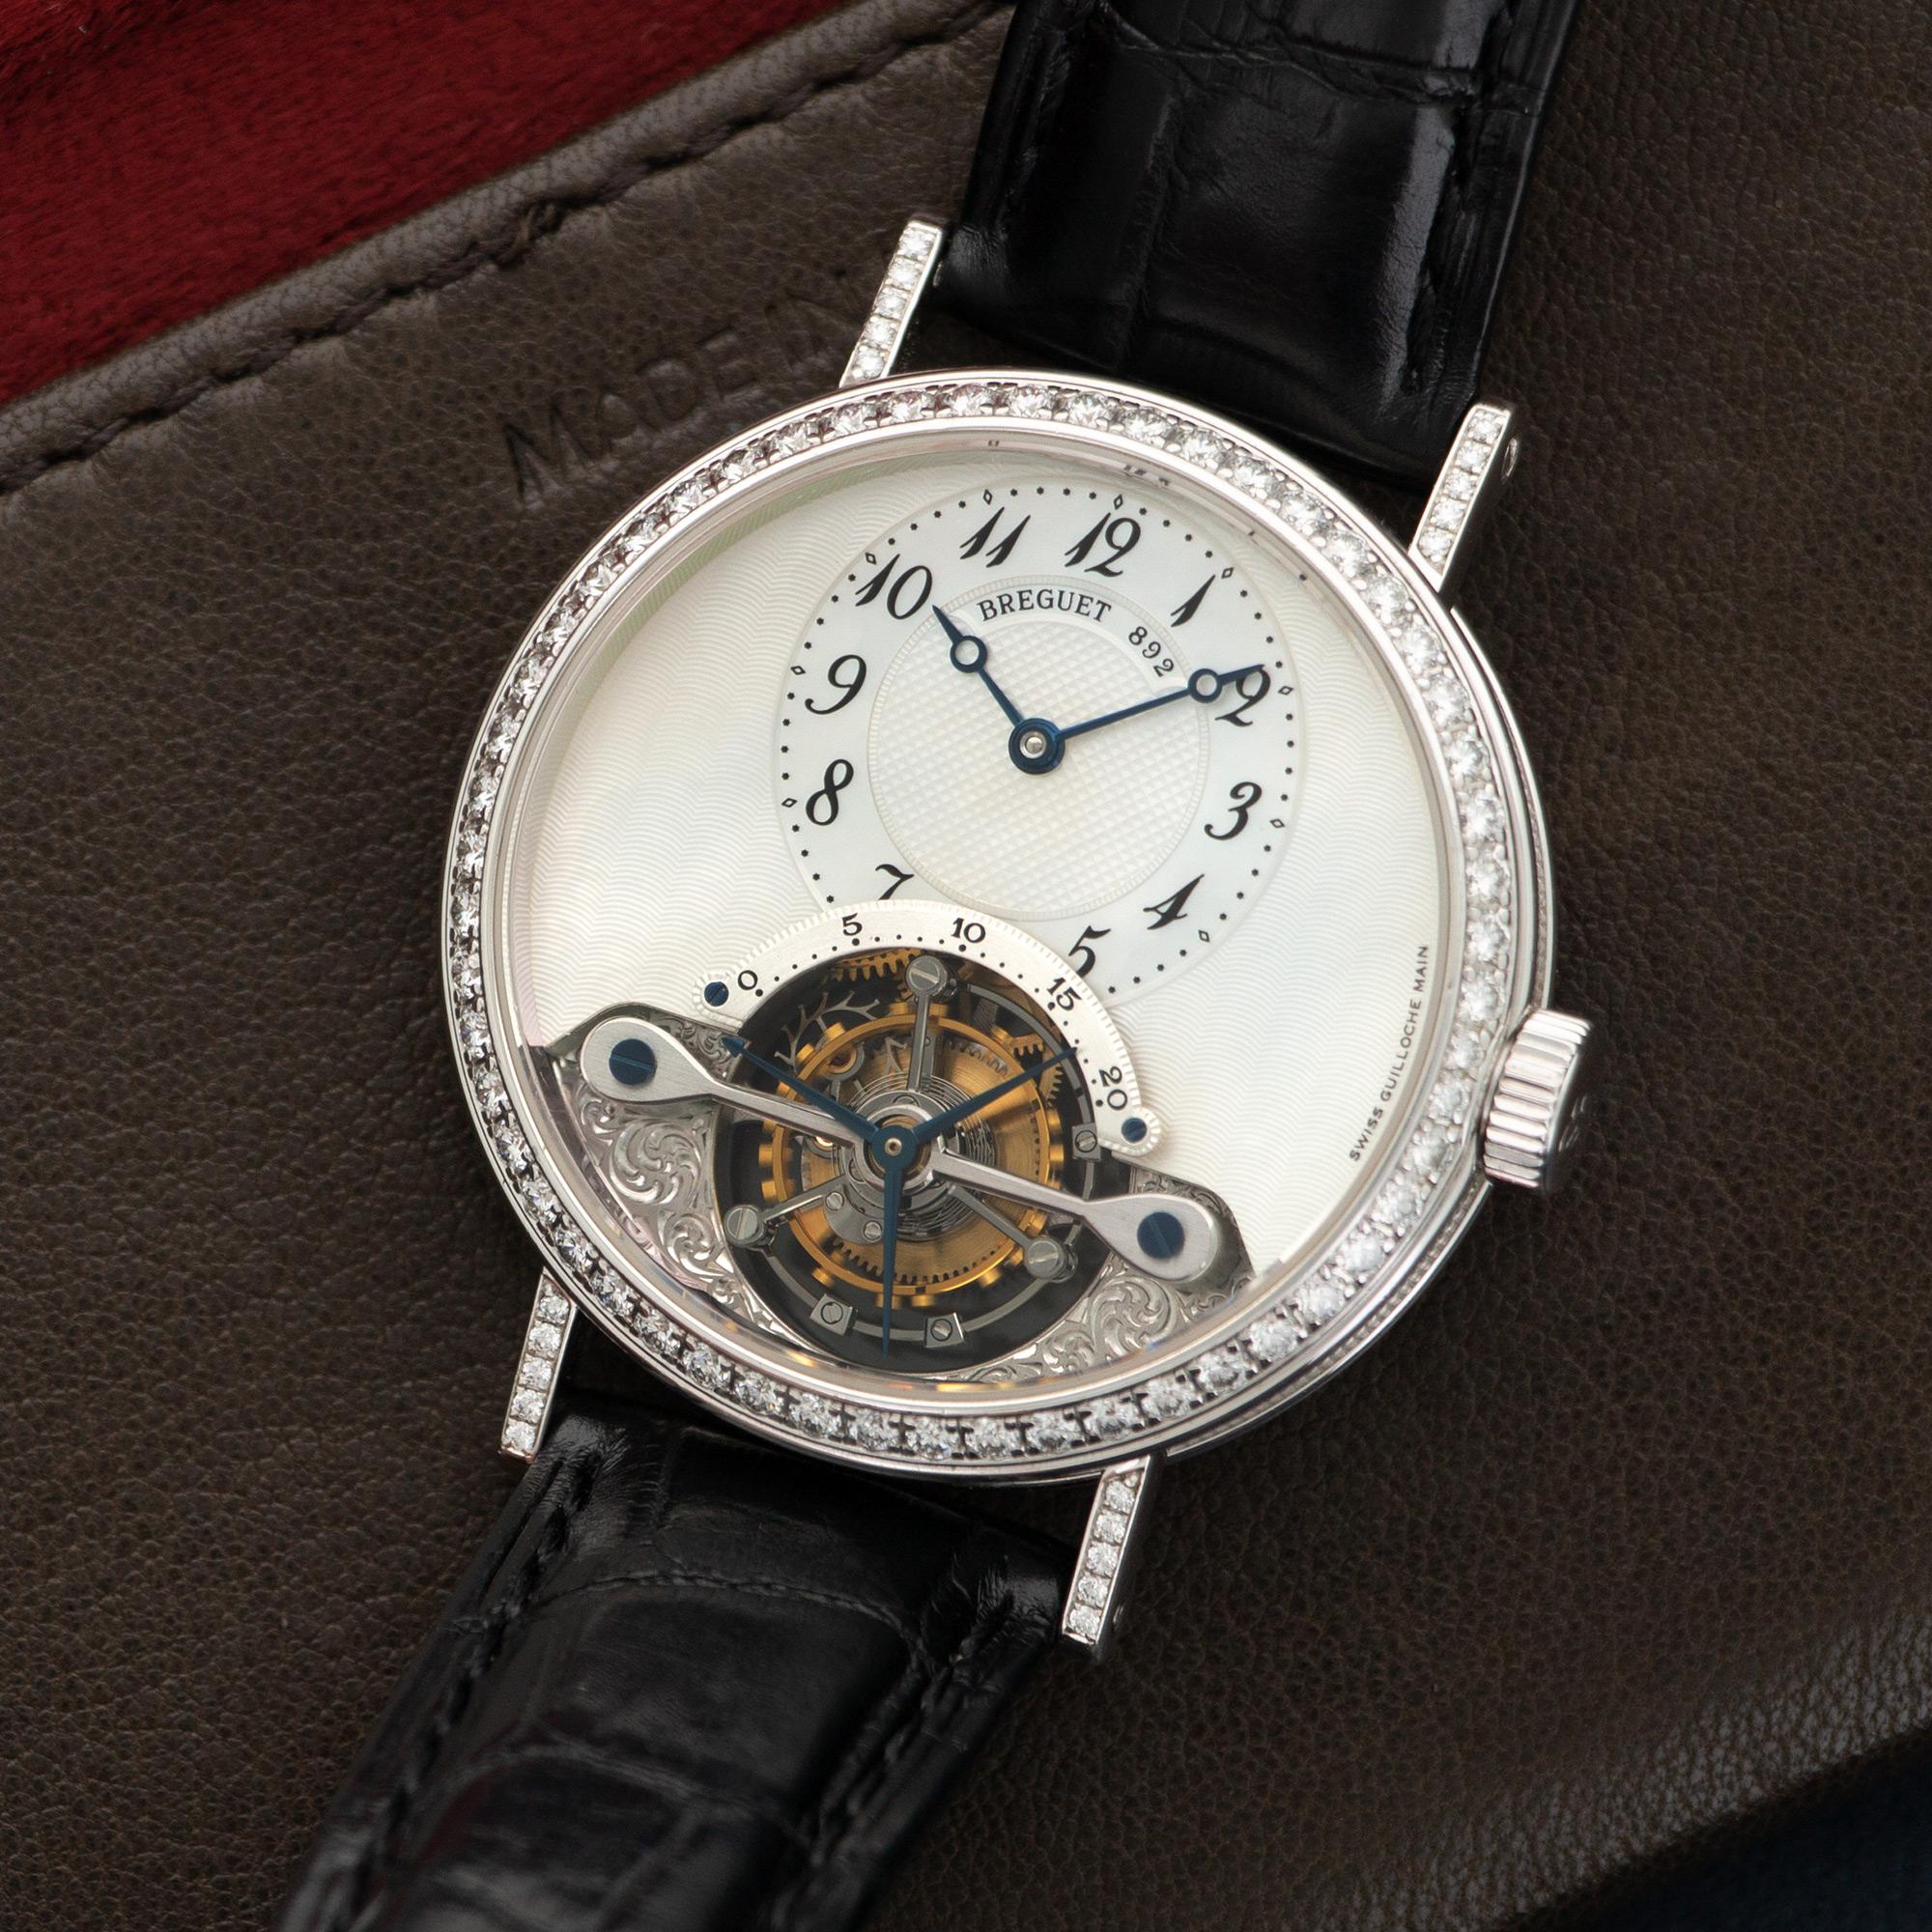 An 18k White Gold Breguet Classique Tourbillon Diamond Watch. Model Number 3358BB/52/986.DD00. 35mm Case Diameter. Mechanical Movement. Mother of Pearl Dial. Comes in its original Box. Retails for $113,500.